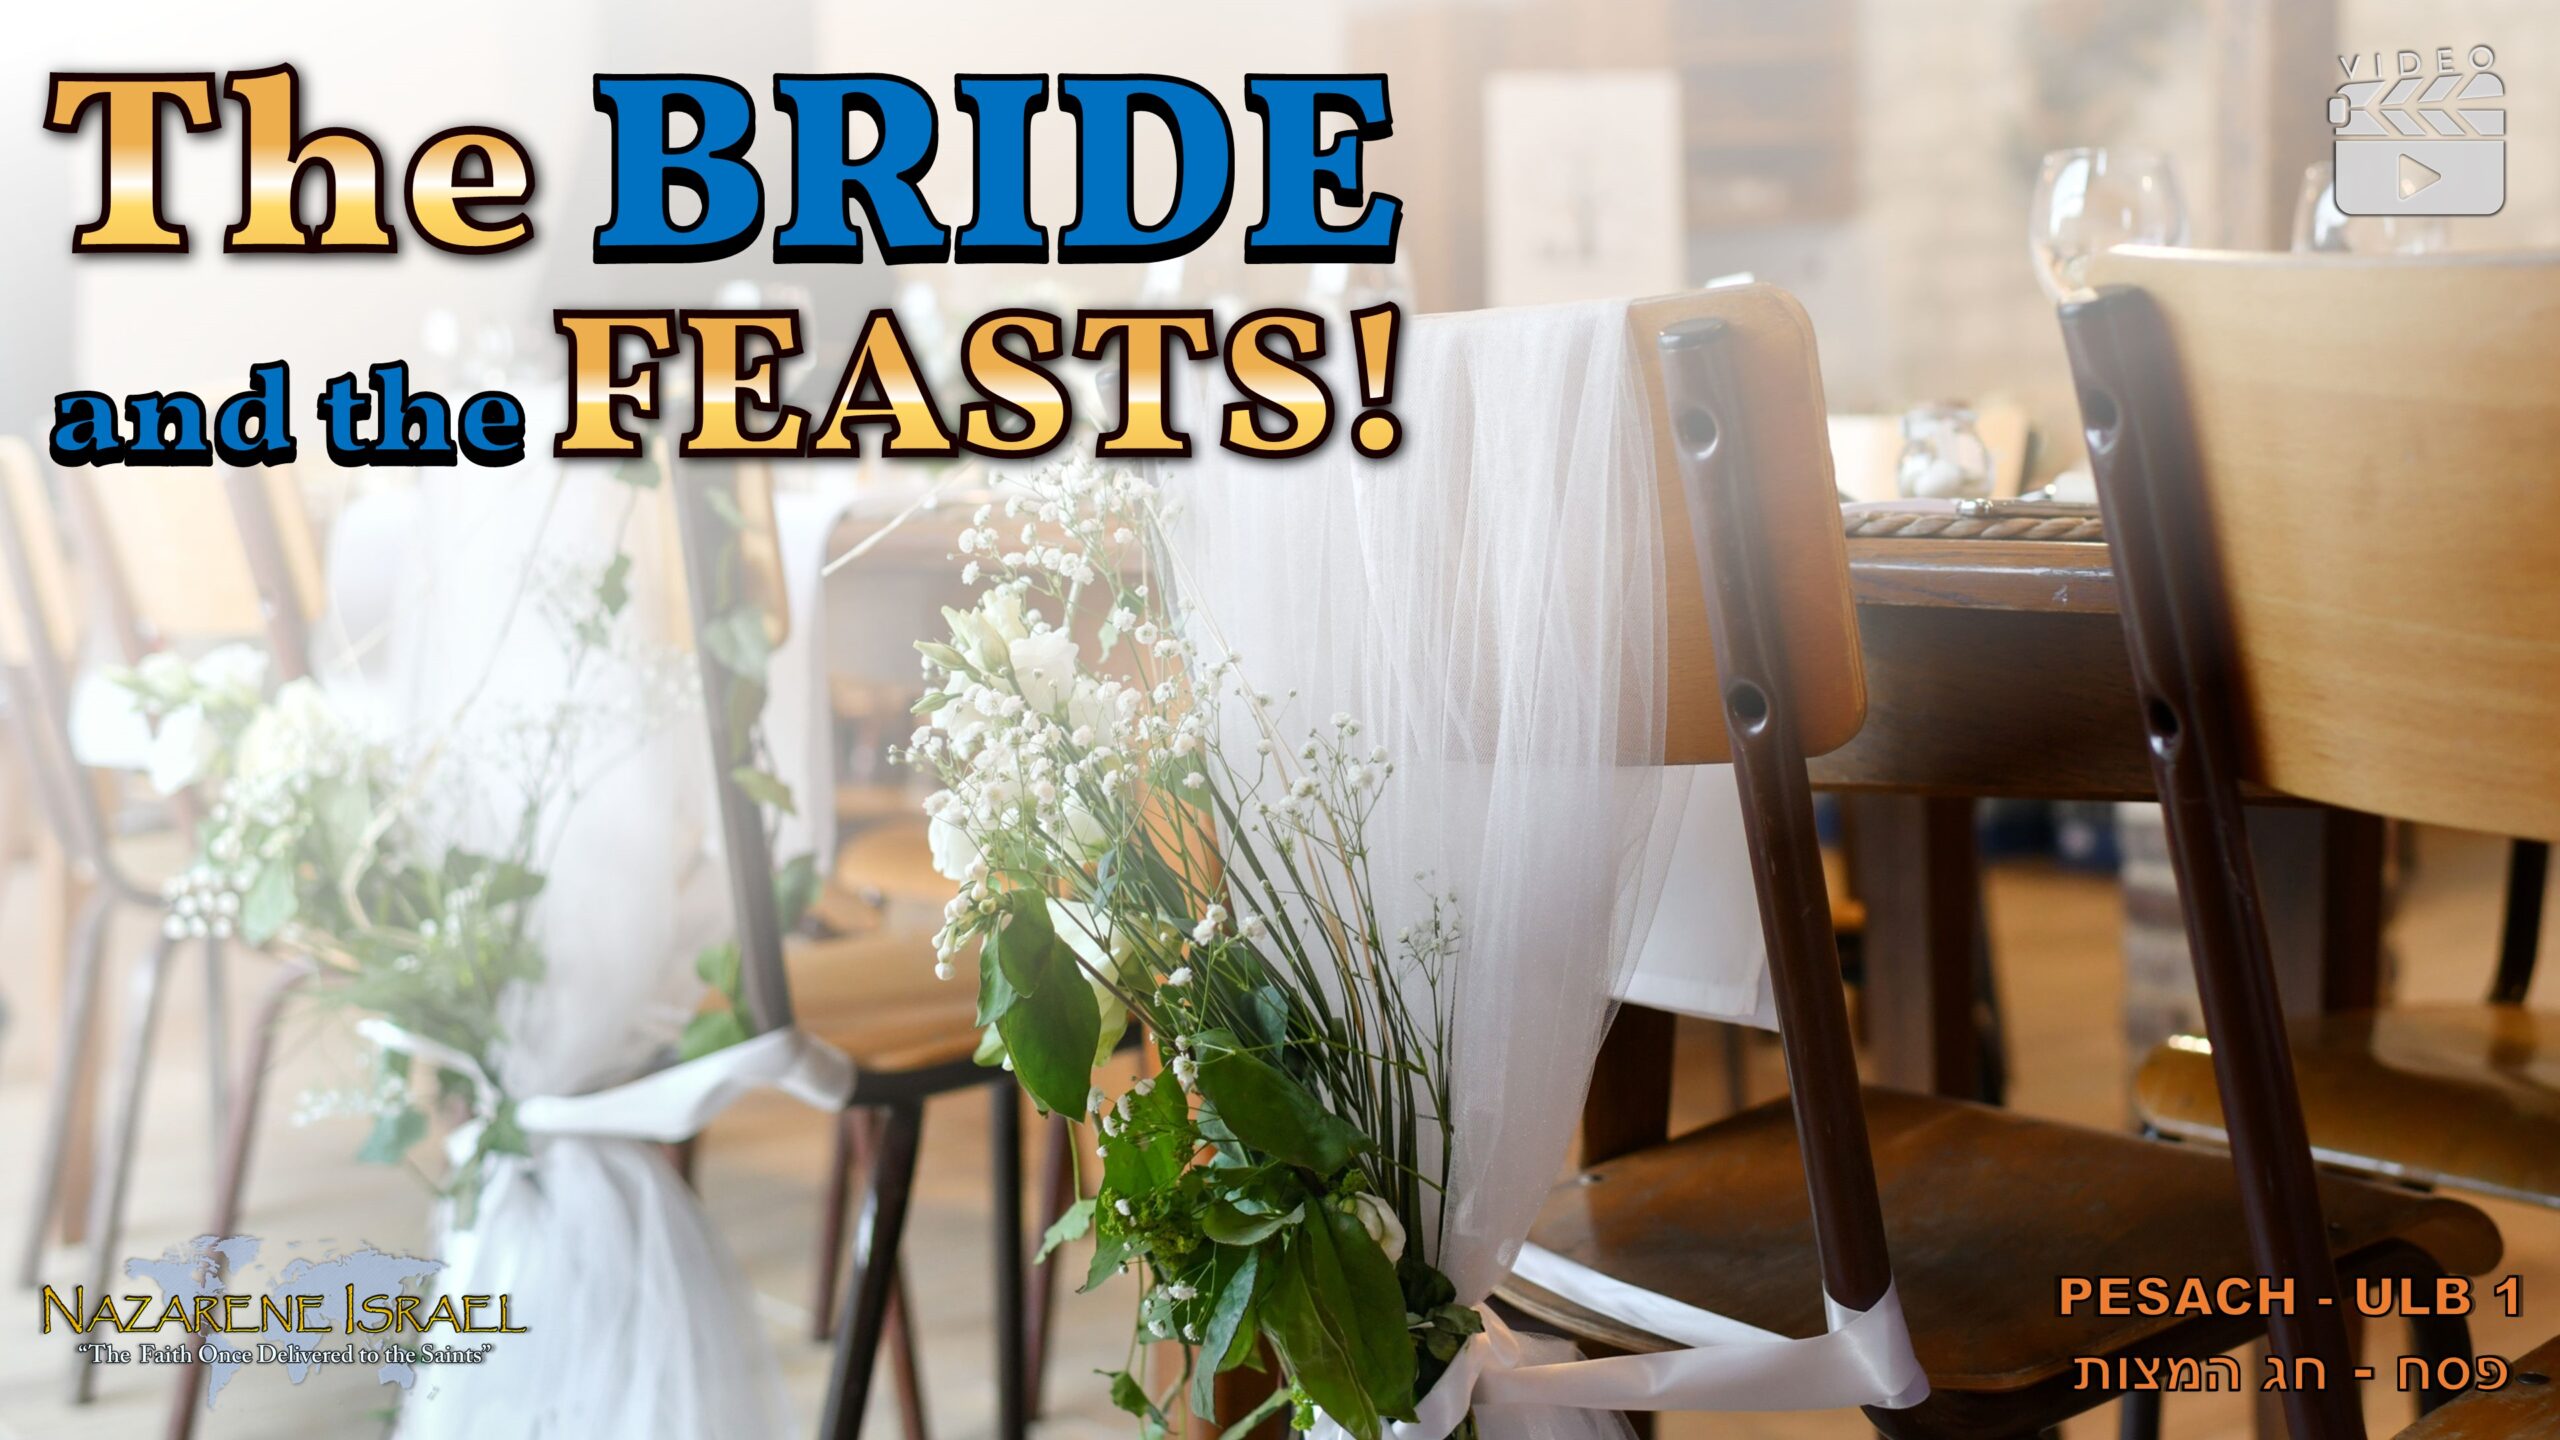 The Bride and the Feasts! Yeshua’s Proverbs 31 Bride!